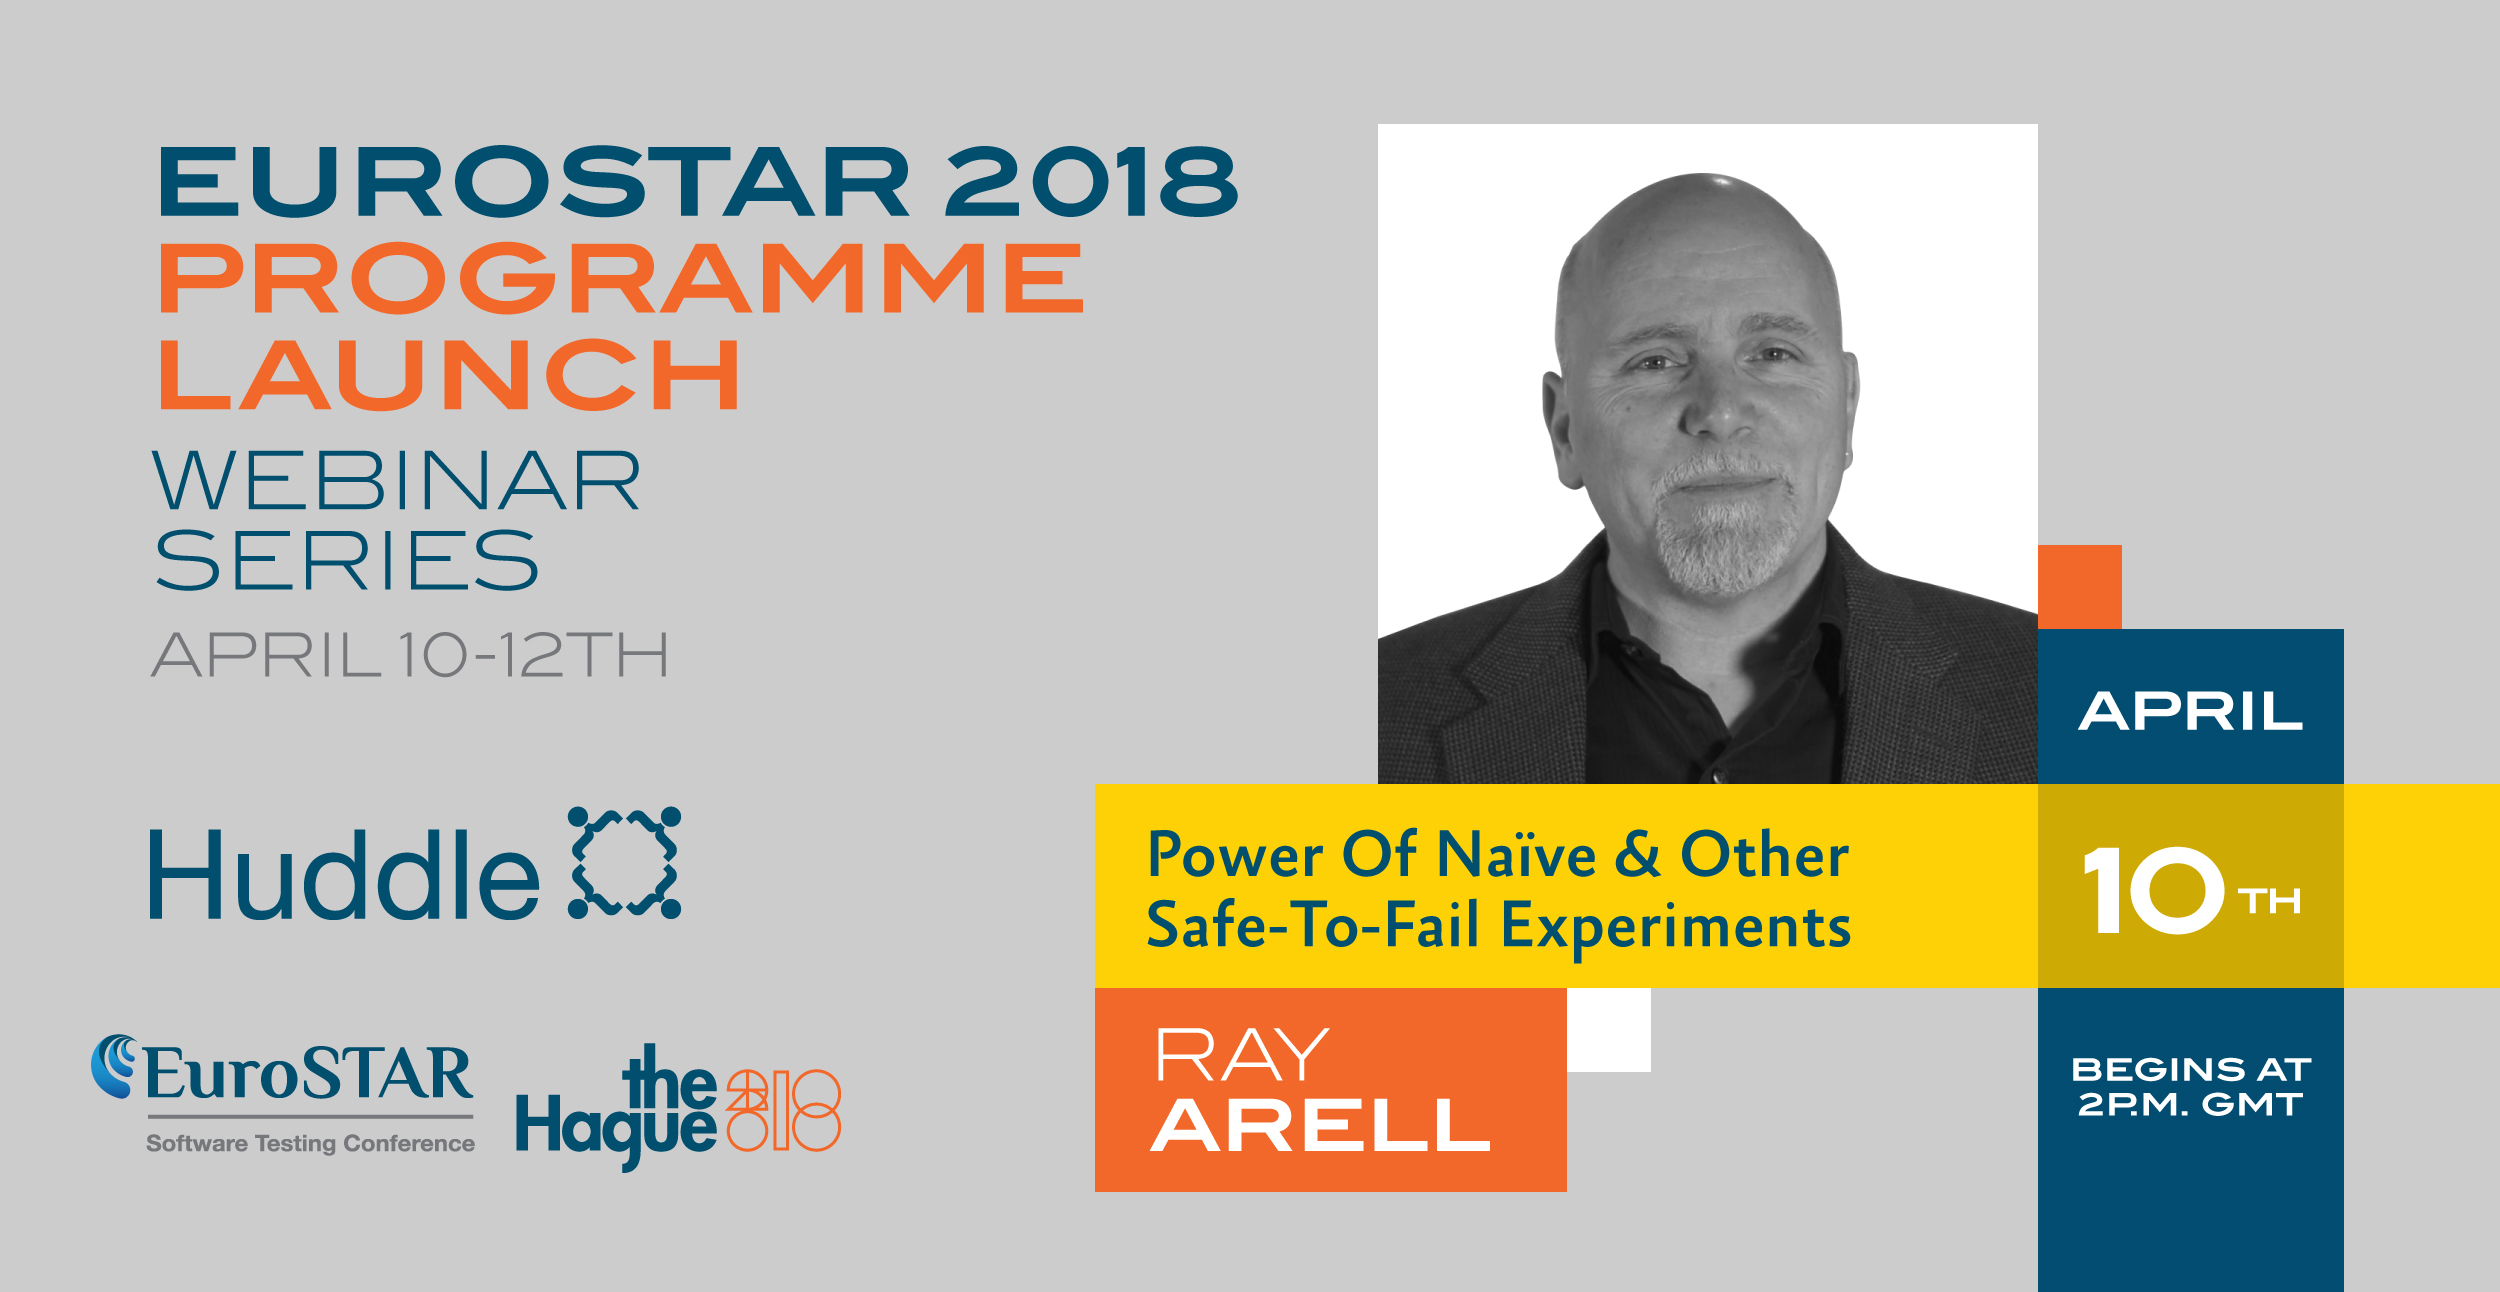 ES2018_Programme_Launch_Webinar_Series_Ray_Arell